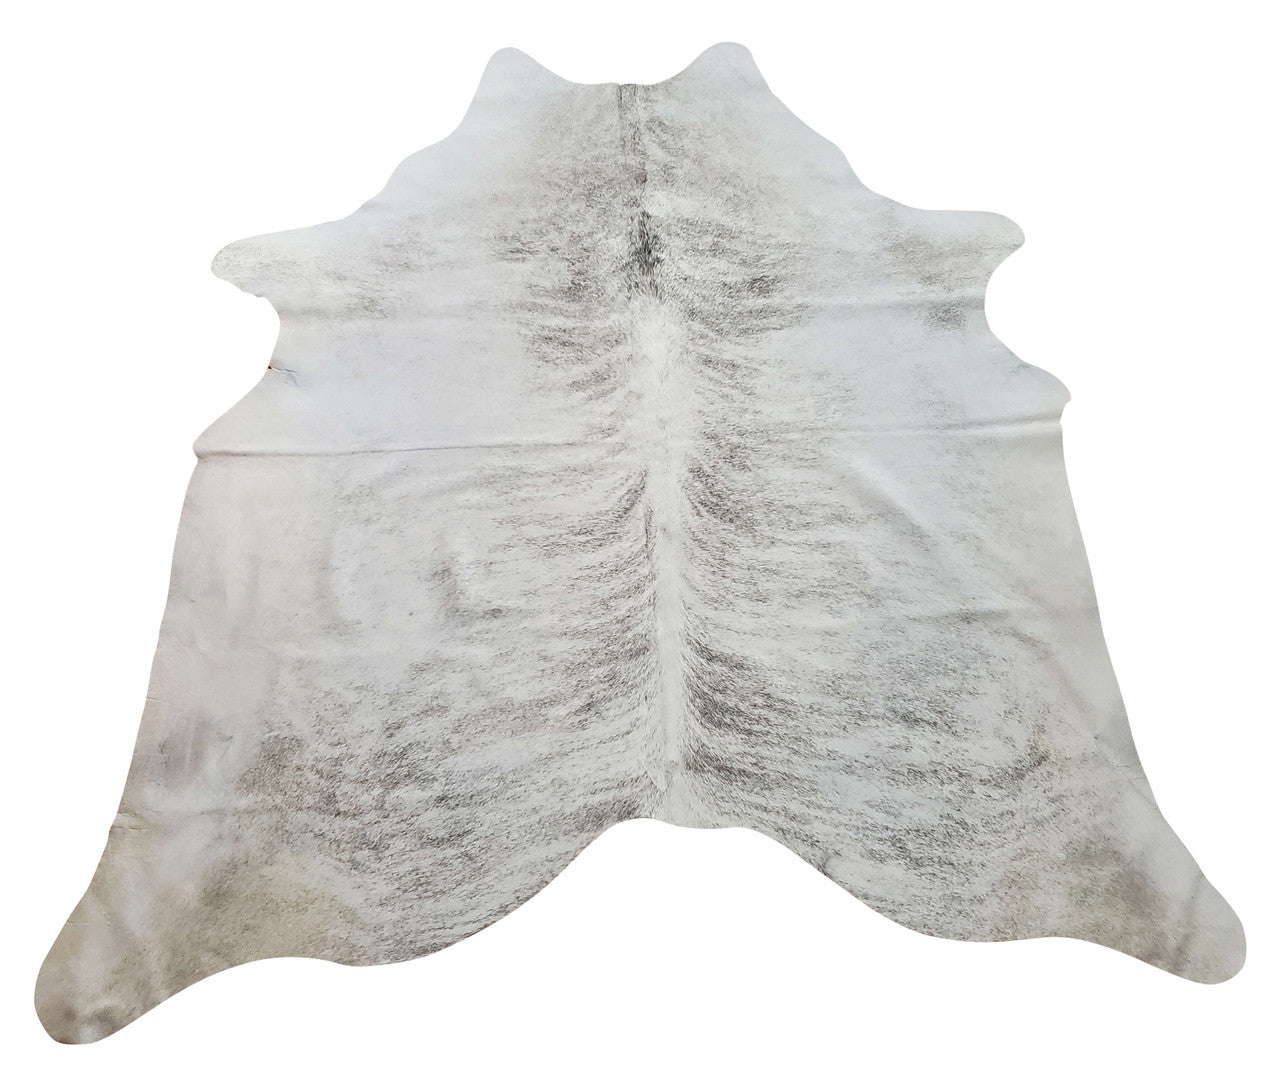 This brindle cowhide rug makes your home feel cozier, and its soft texture is one of a kind plus get it anywhere in Canada within one to four business days
